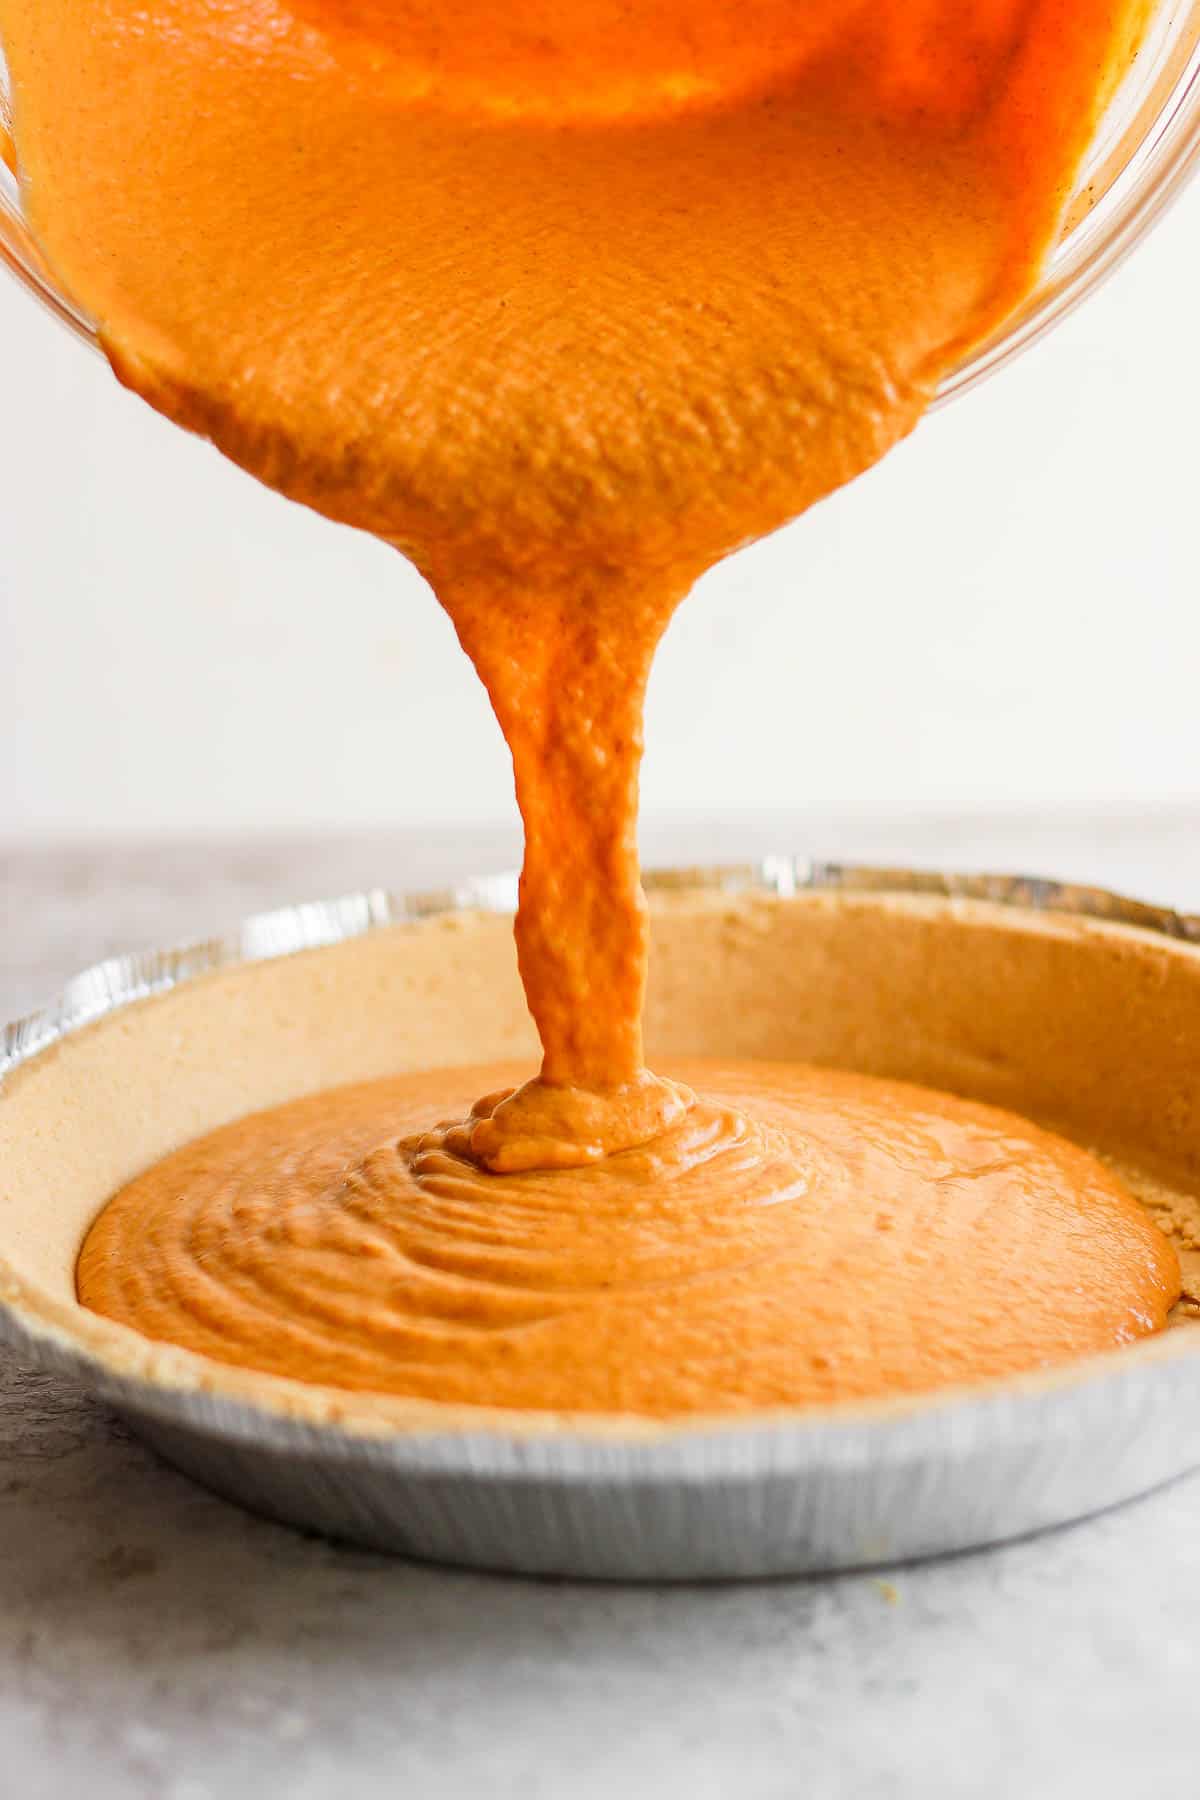 Pumpkin pie filling being poured into a store bought pie crust.